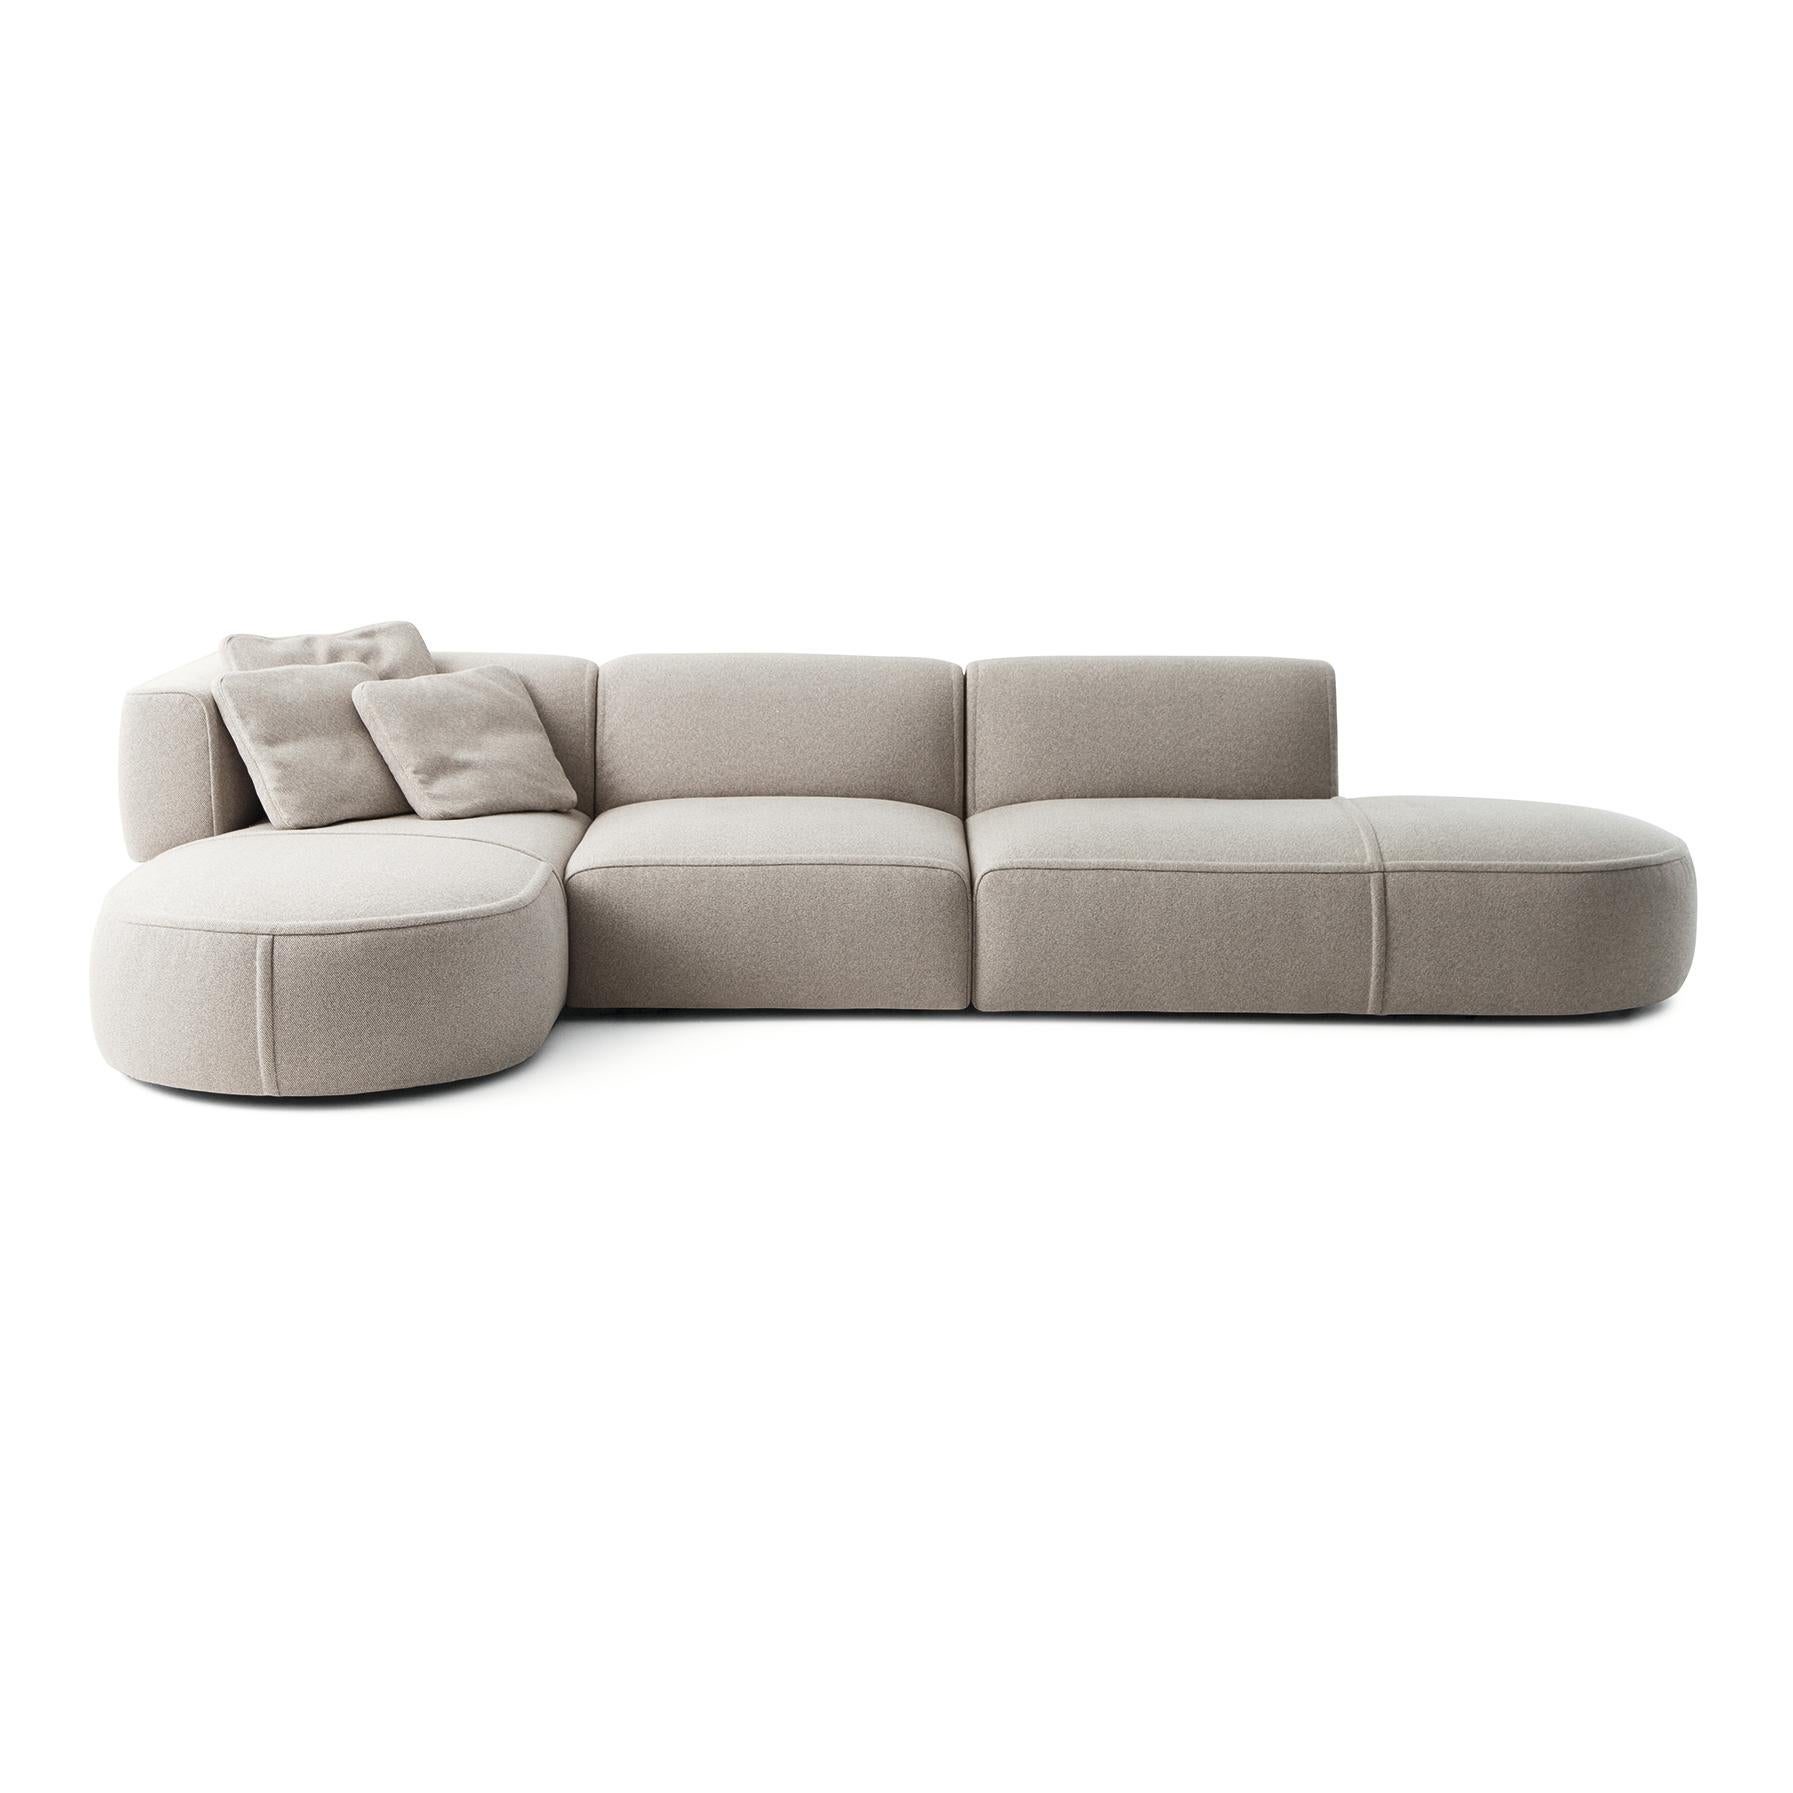 Modular sofa designed by Patricia Urquiola in 2018. Manufactured by Cassina in Italy.

An inventive modular sofa, with soft, inviting curves that bespeak comfort to the max and extreme versatility. The rounded arm-rests curve to meet the back, the